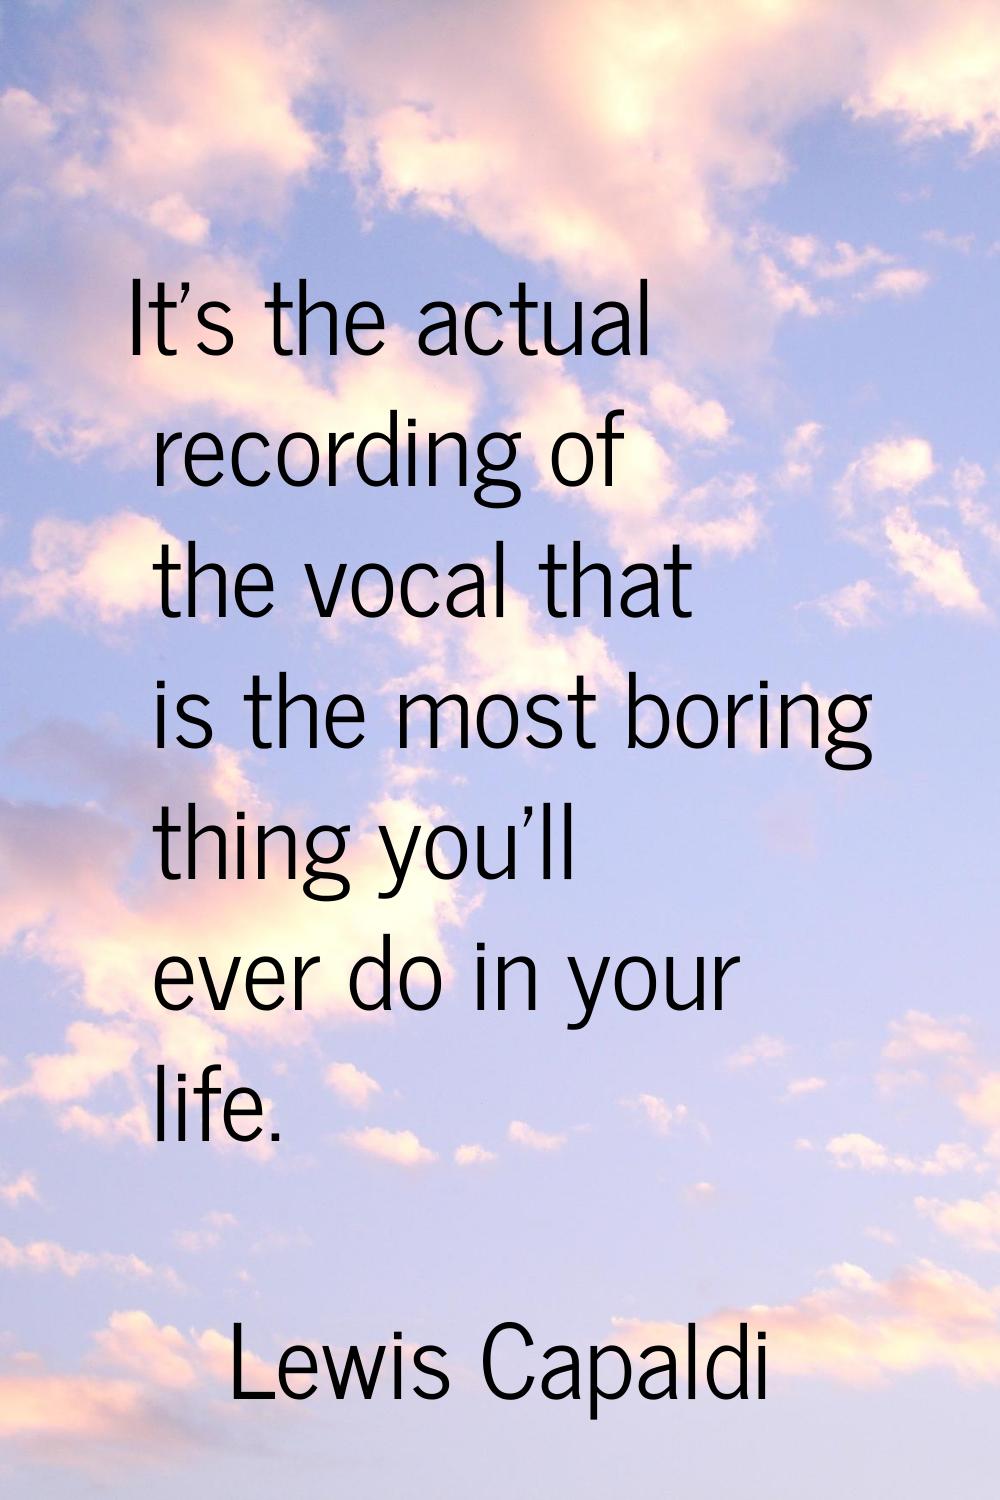 It's the actual recording of the vocal that is the most boring thing you'll ever do in your life.